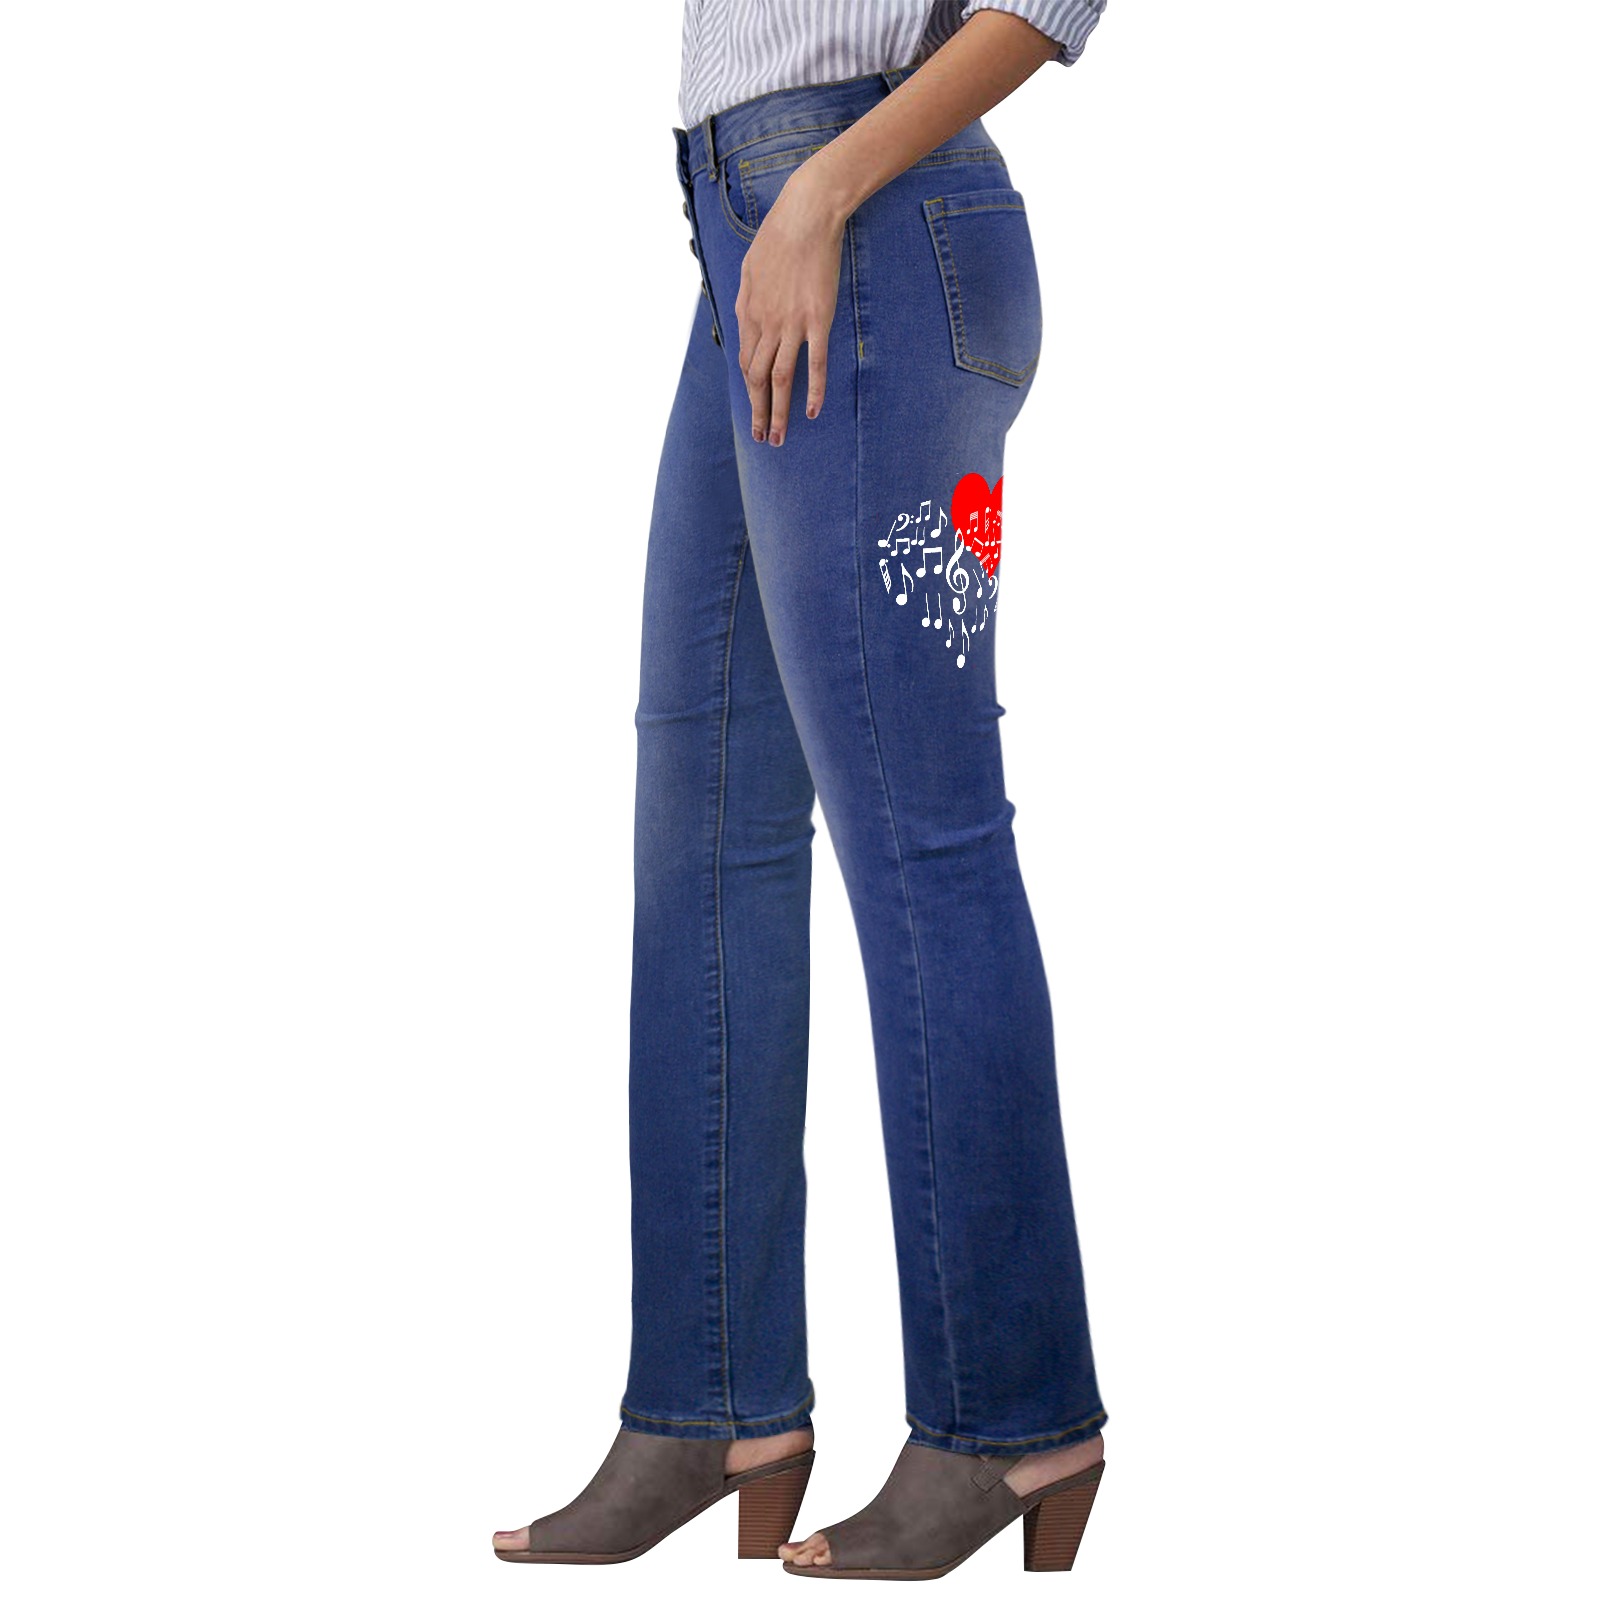 Singing Heart Red Note Music Love Romantic White Women's Jeans (Back Printing)